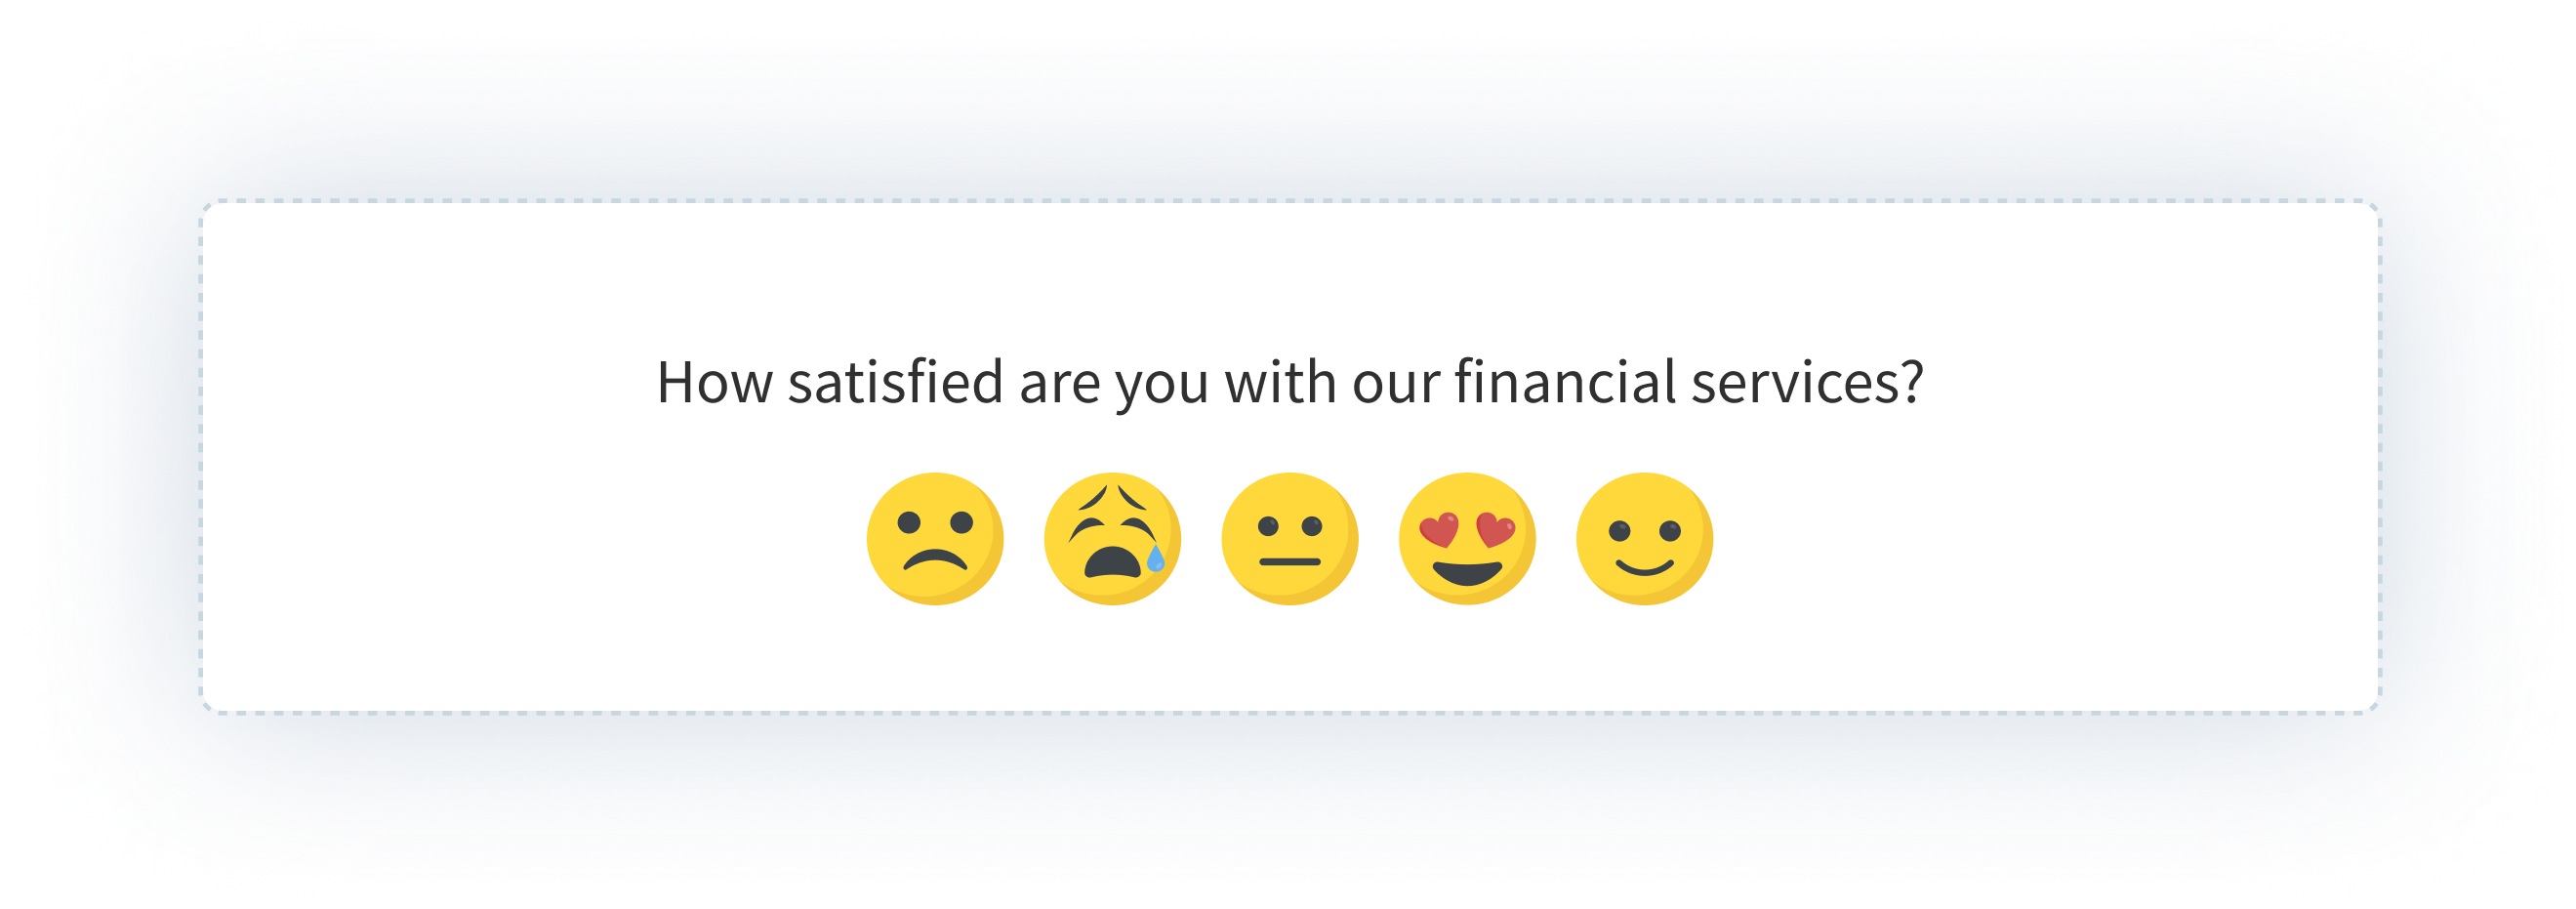 1 to 5 rating questions for Financial Services